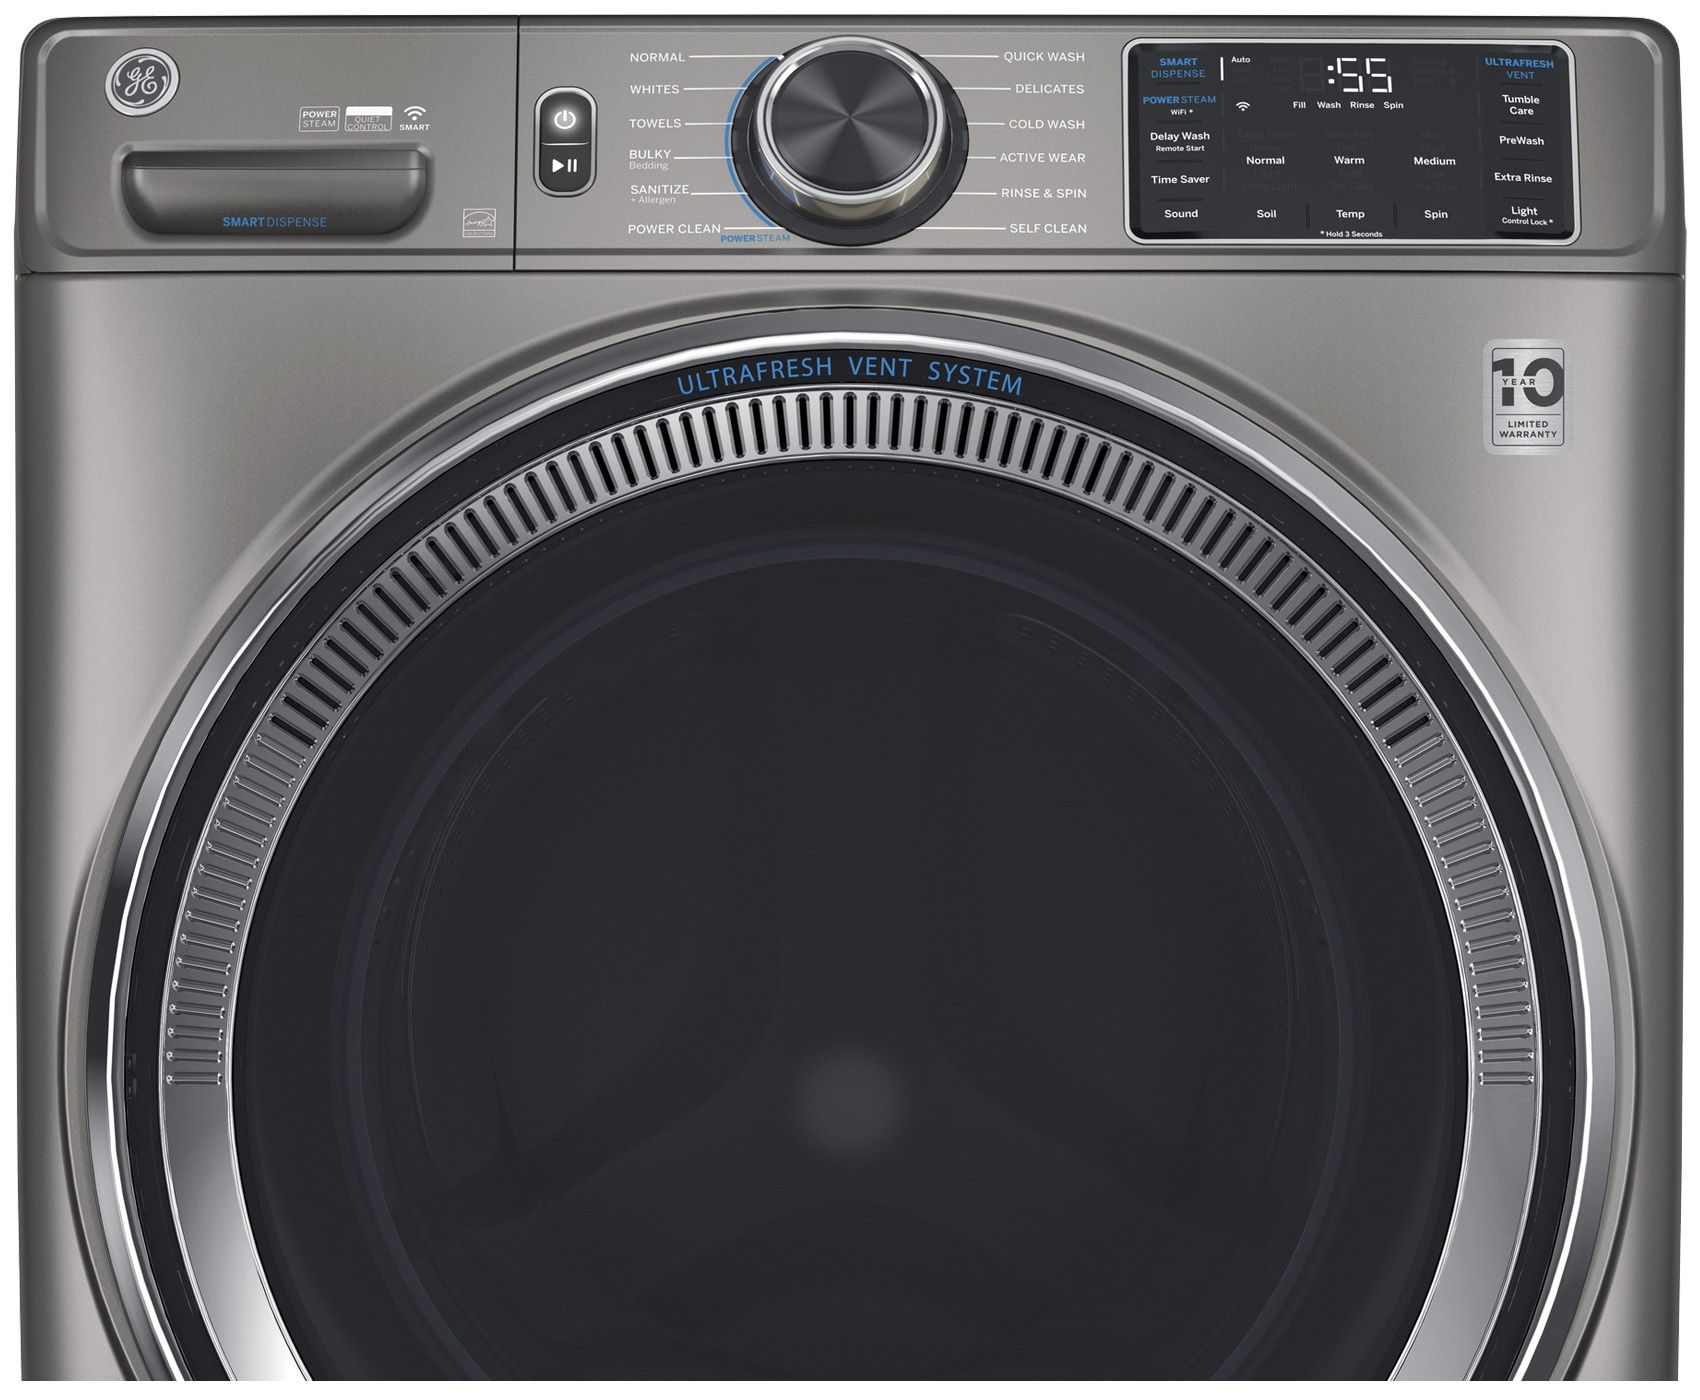 How To Fix The Error Code E94 For GE Washing Machine